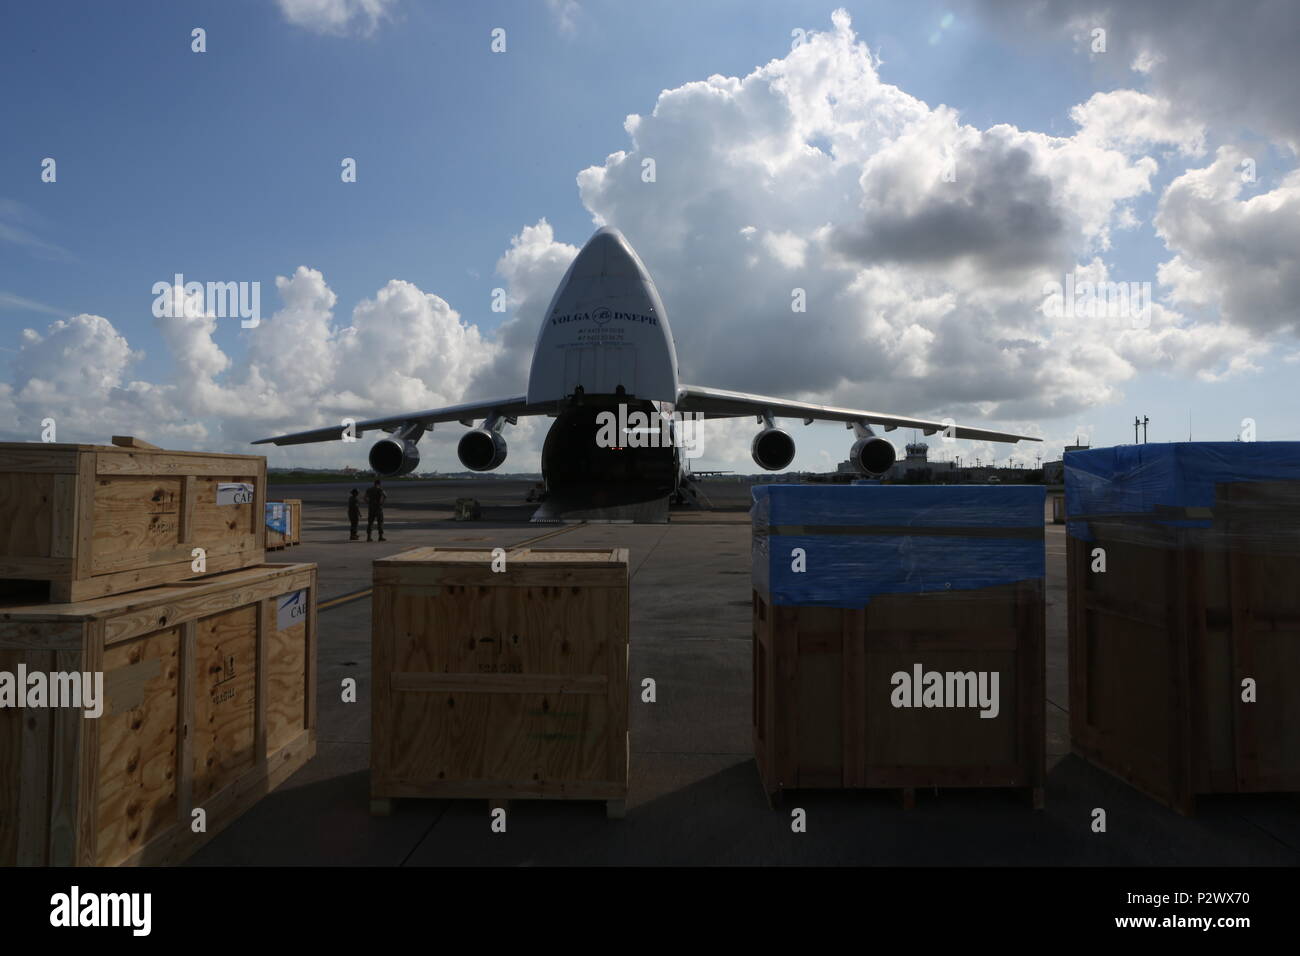 U.S. DoD members with Canadian Aviation Electronics (CAE), and Volgar-Dnepr crew members load gear at Marine Corps Air Station Futenma, August 2, 2016. CAE members work in conjunction with the Volgar-Dnepr crew members to load gear for transport to Marine Corps Air Station Iwikiuni, Japan. (U.S. Marine Corps photo by Lance Cpl. Brooke Deiters/ Released) Stock Photo